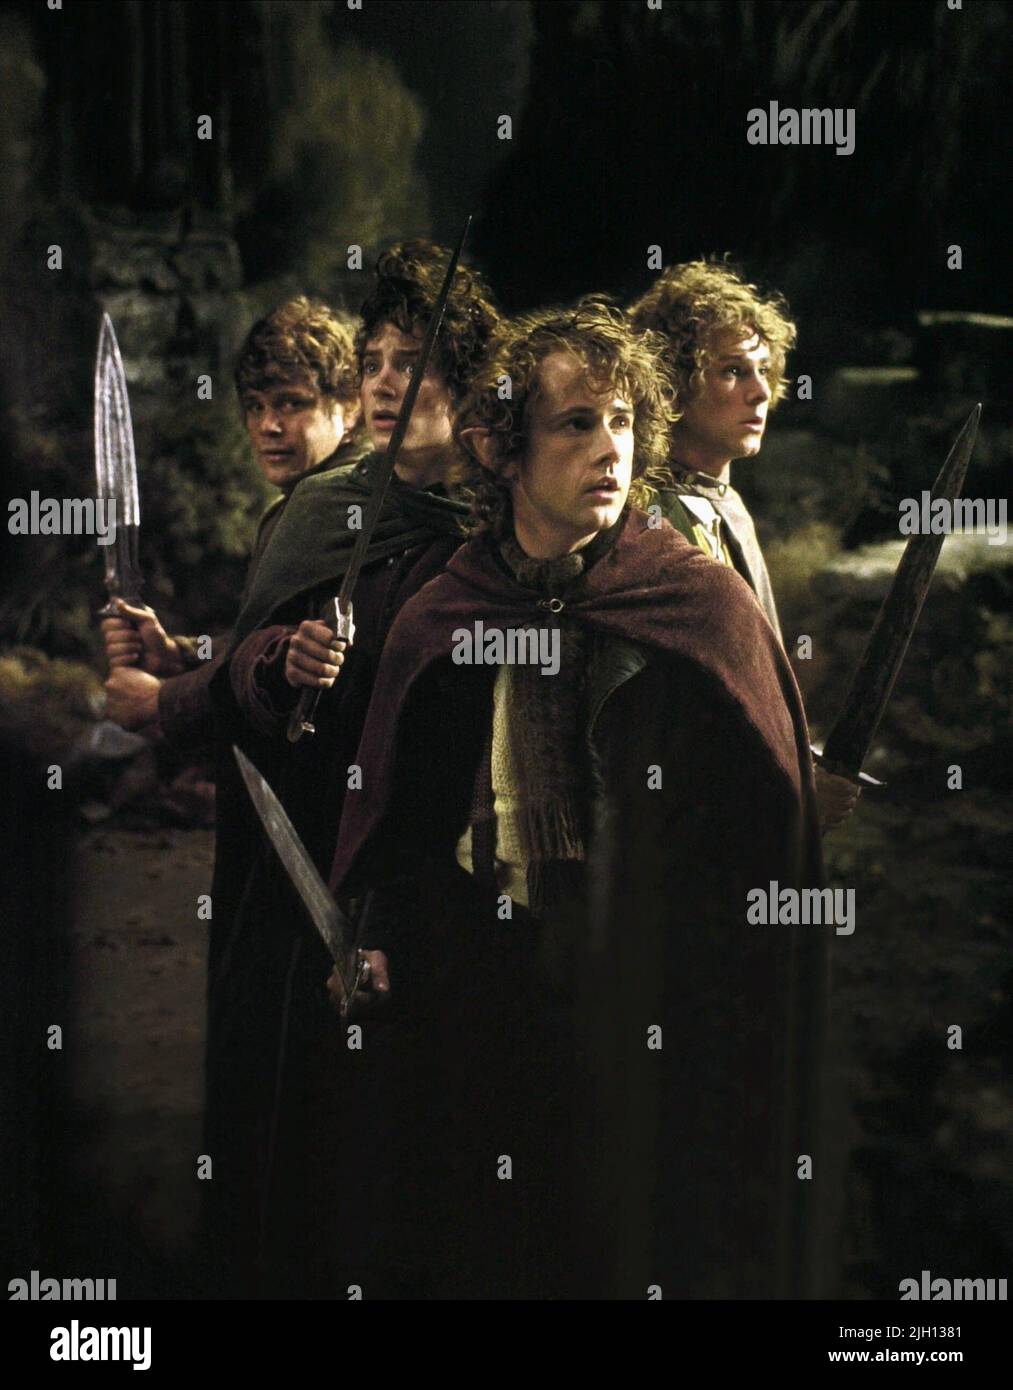 ASTIN,WOOD,BOYD,MONAGHAN, THE LORD OF THE RINGS: THE FELLOWSHIP OF THE RING, 2001 Stock Photo